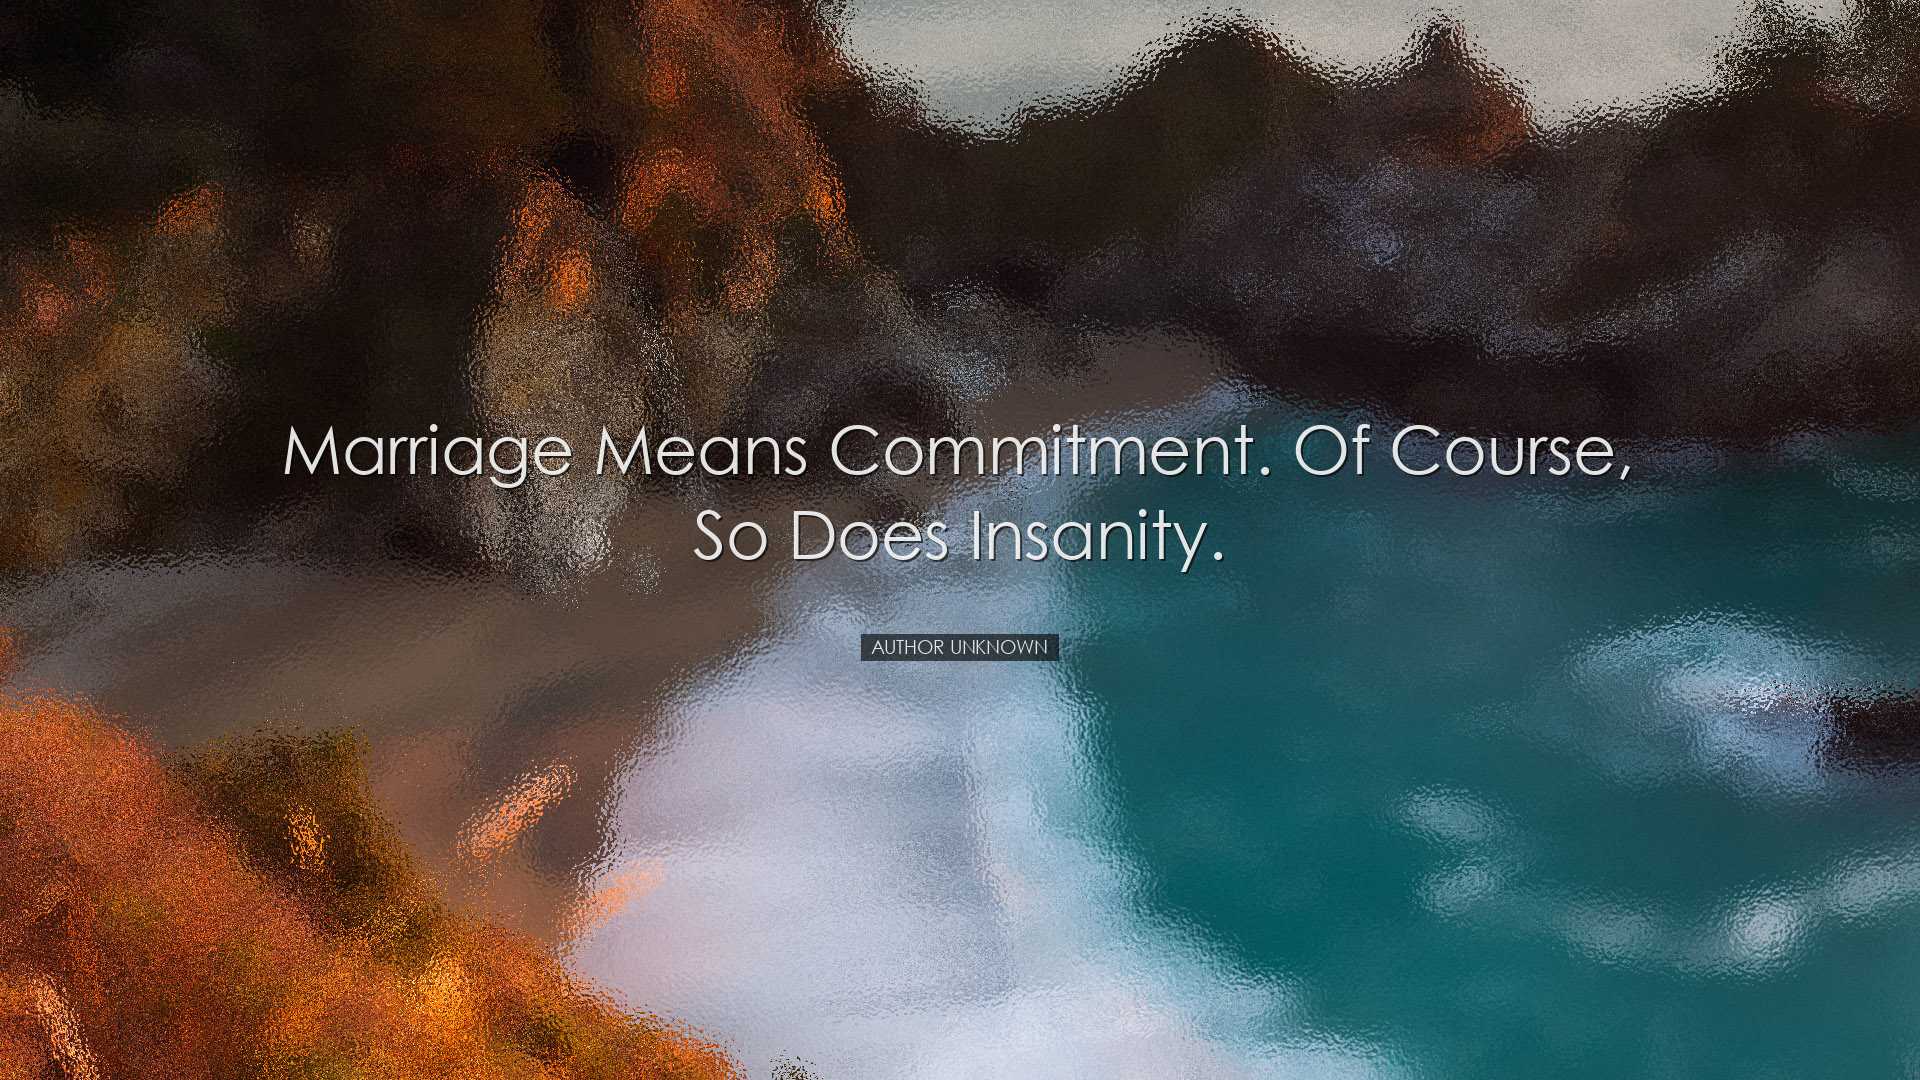 Marriage means commitment. Of course, so does insanity. - Author u